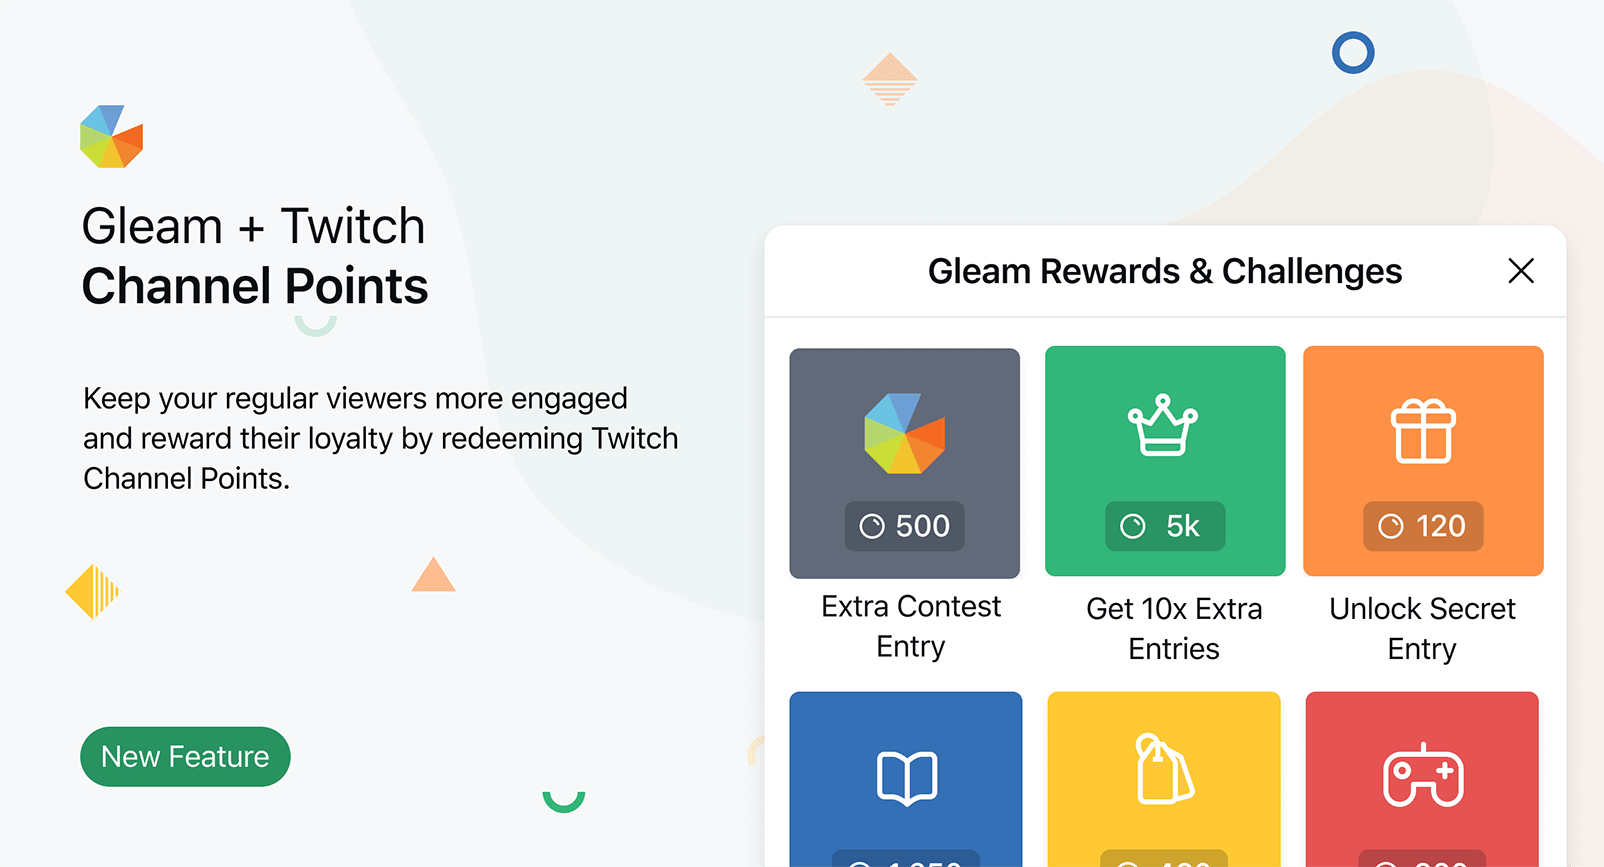 Update: Gleam integrates with Twitch Channel Points